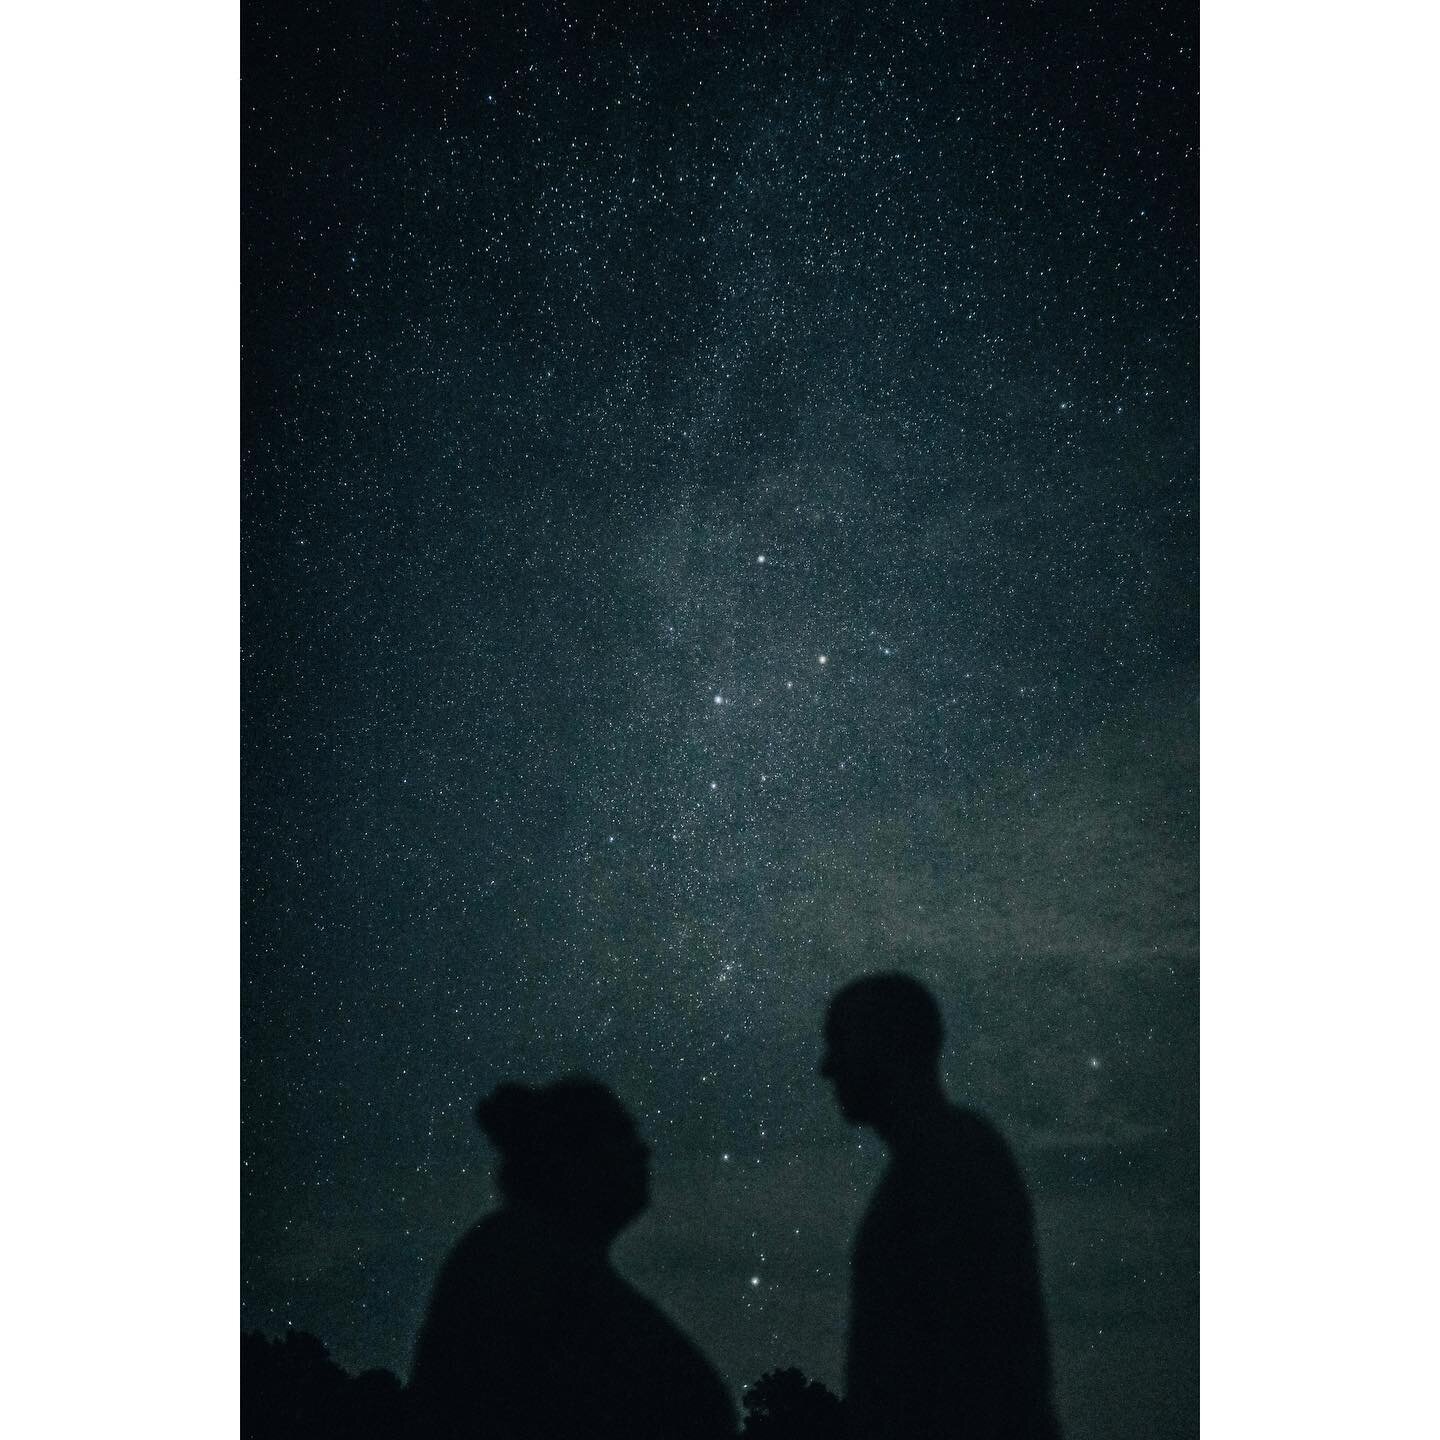 Our 10 year Anniversary was this month! 🖤✨🖤
We went camping and I was able to practice some astrophotography! Here are some of my favorite shots. The clouds started to come out but I still love those shots as well. 🖤
.
.
.
.
.
.
.
.
.
.
.
.
.
.
.
